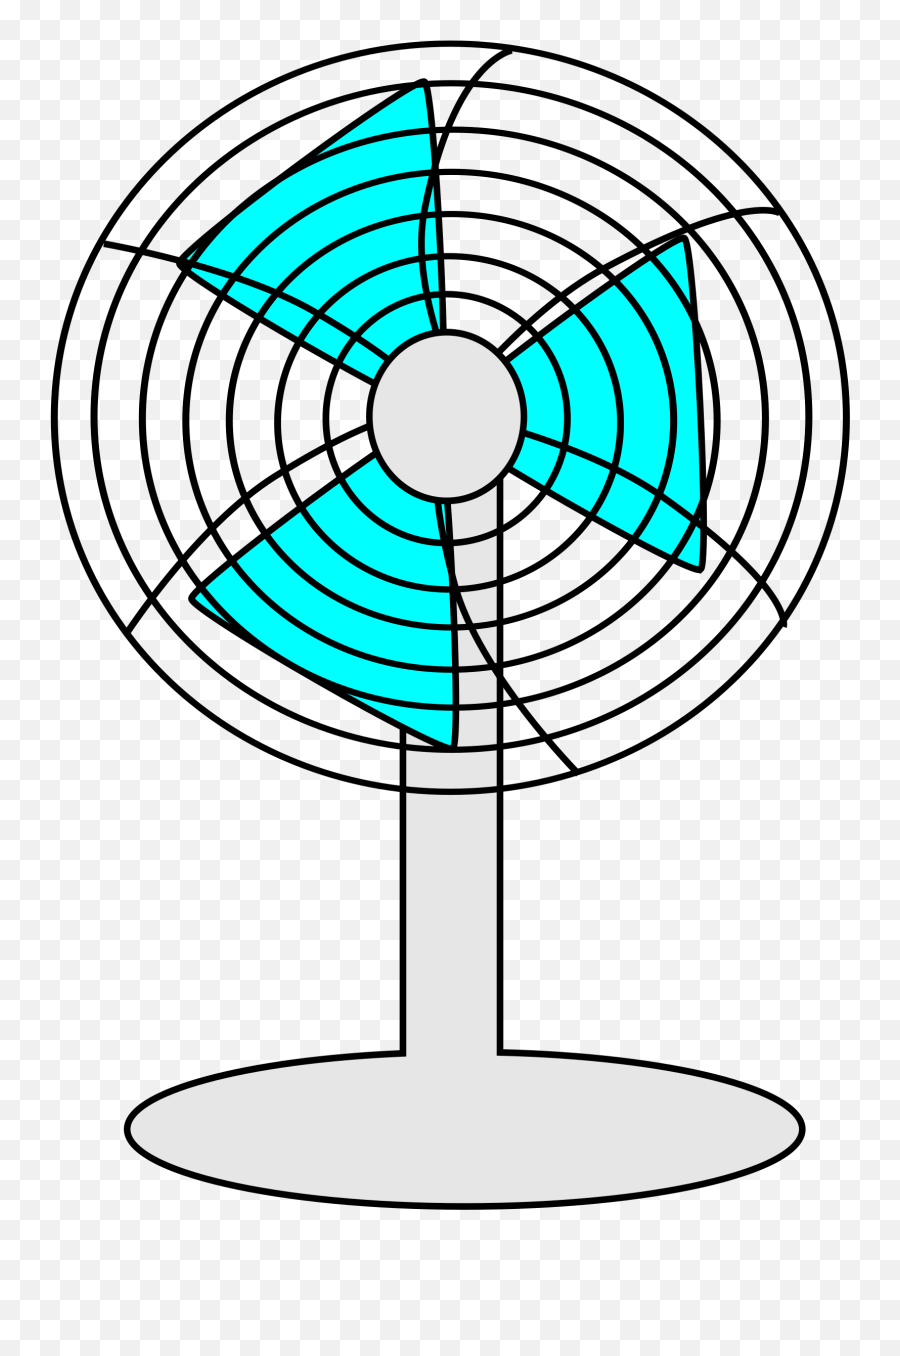 Download This Free Icons Png Design Of Fan - 2d Png Image With Colouring Pages Of Fan,2d Icon